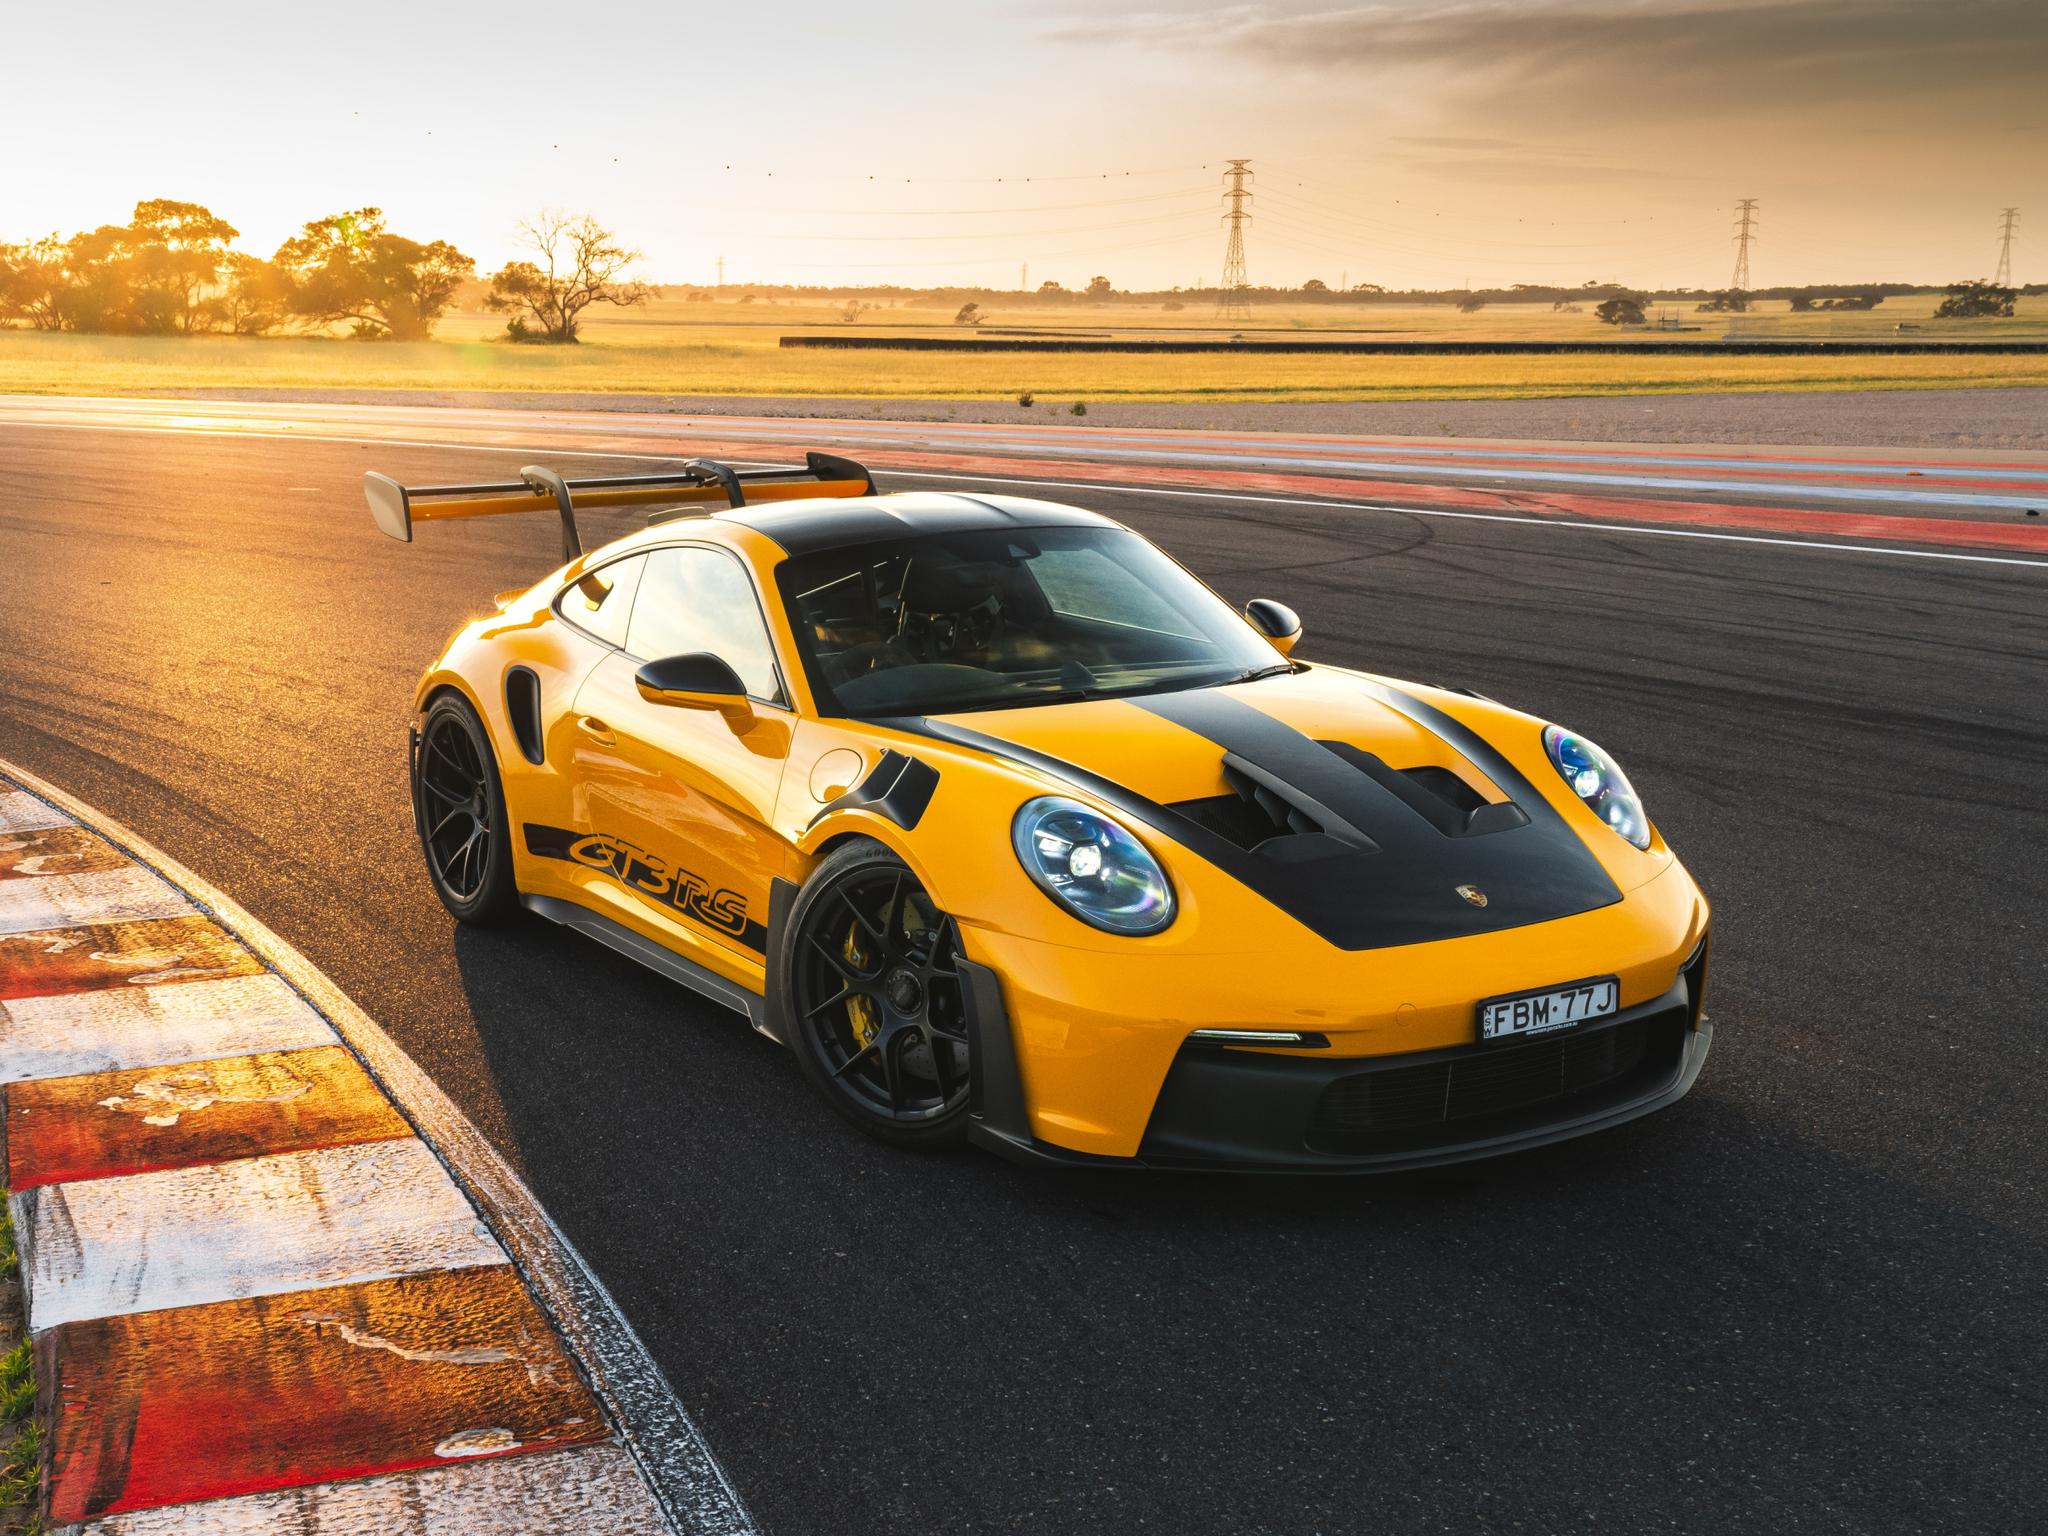 Porsche 911 GT3 RS review: believe it or not, this car is legal